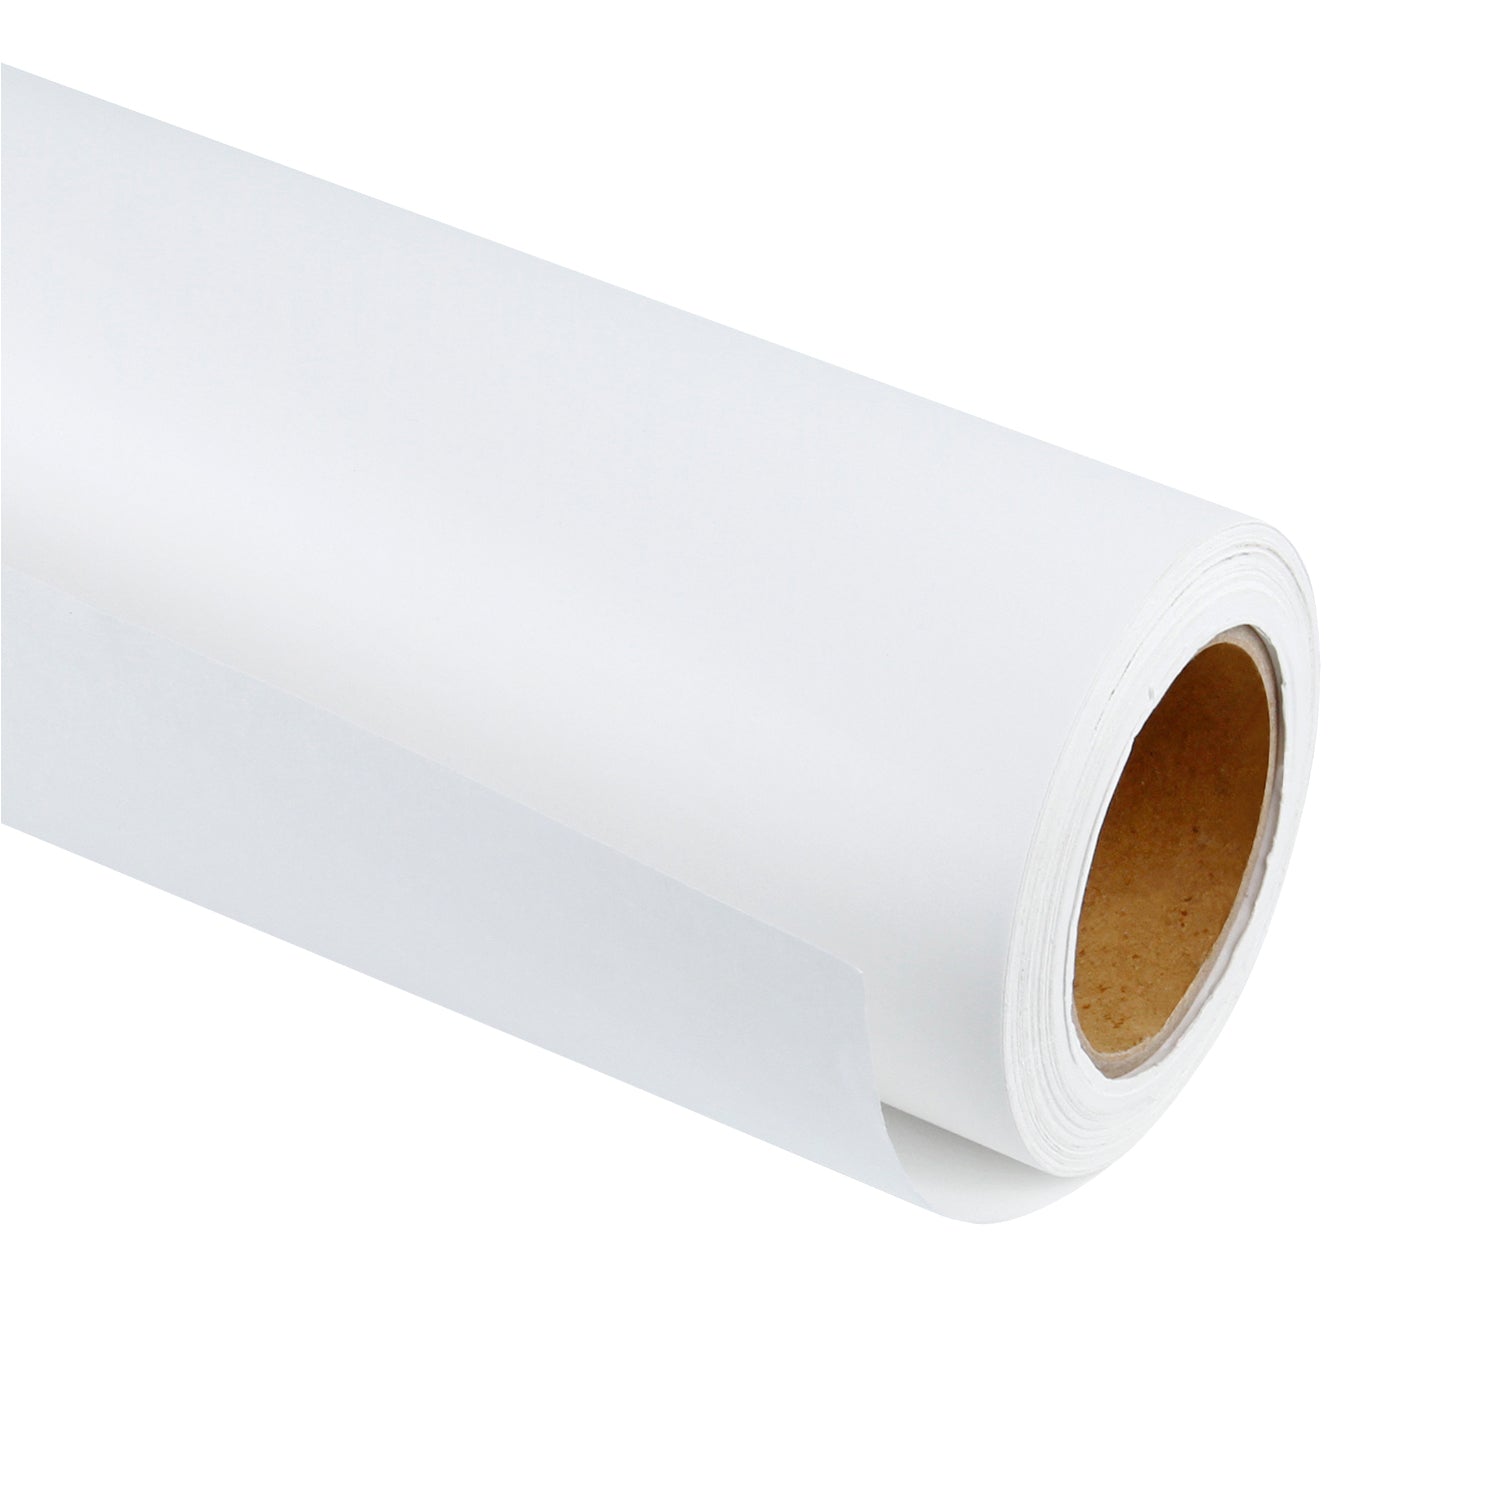 White Kraft Paper Roll - 36 inch x 100 Feet - Recycled Paper Perfect f